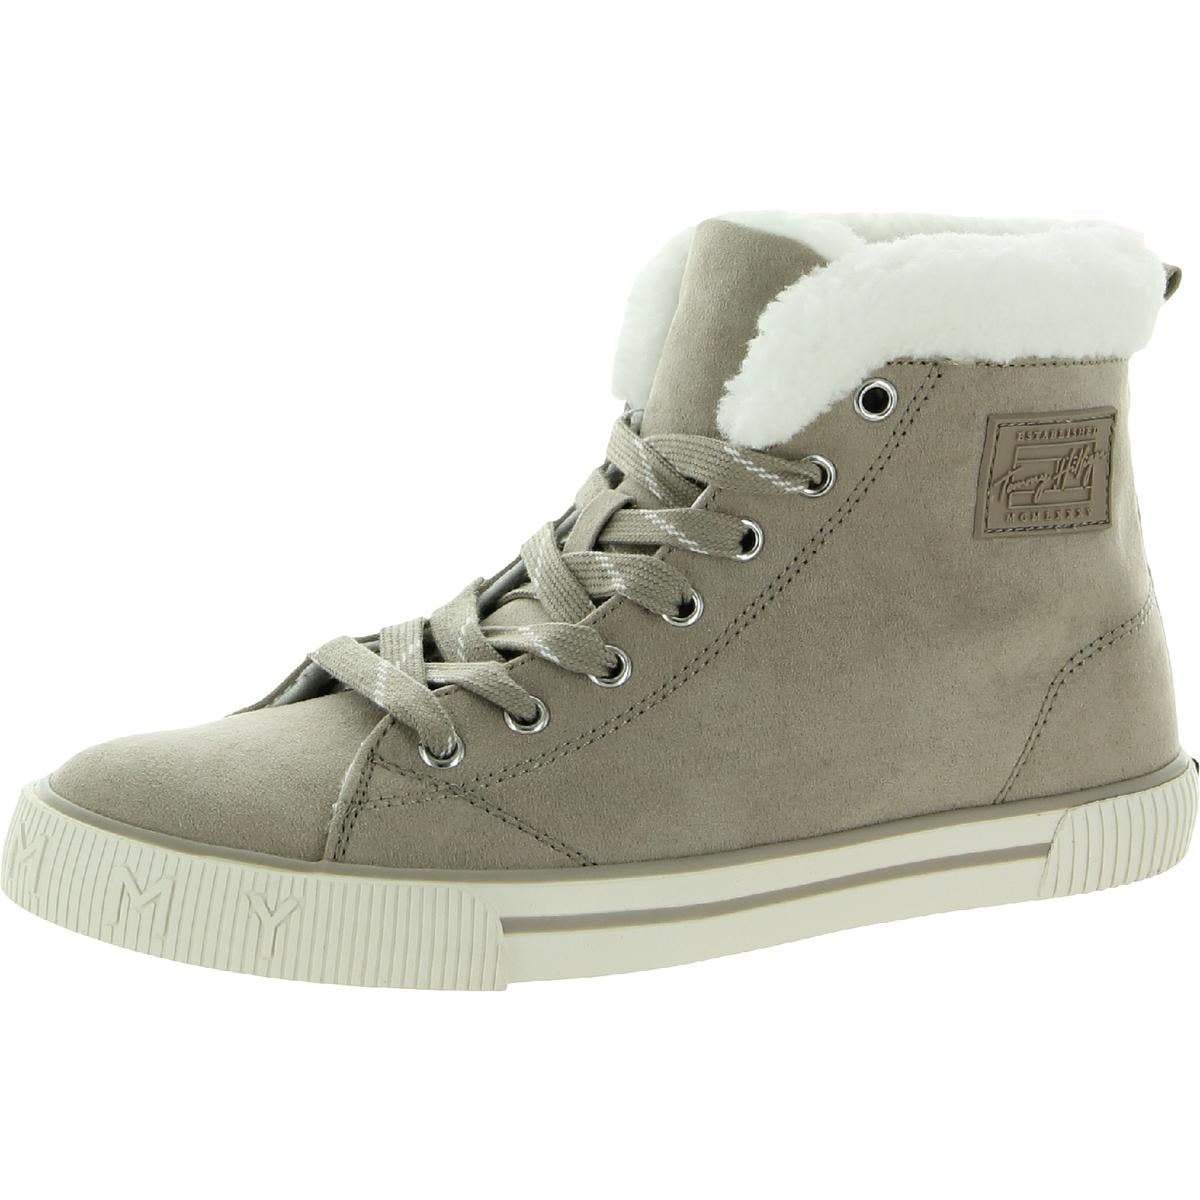 Decoderen Tot stand brengen kust Tommy Hilfiger Womens Olina Faux Suede Hi Top Casual and Fashion Sneakers -  Walmart.com